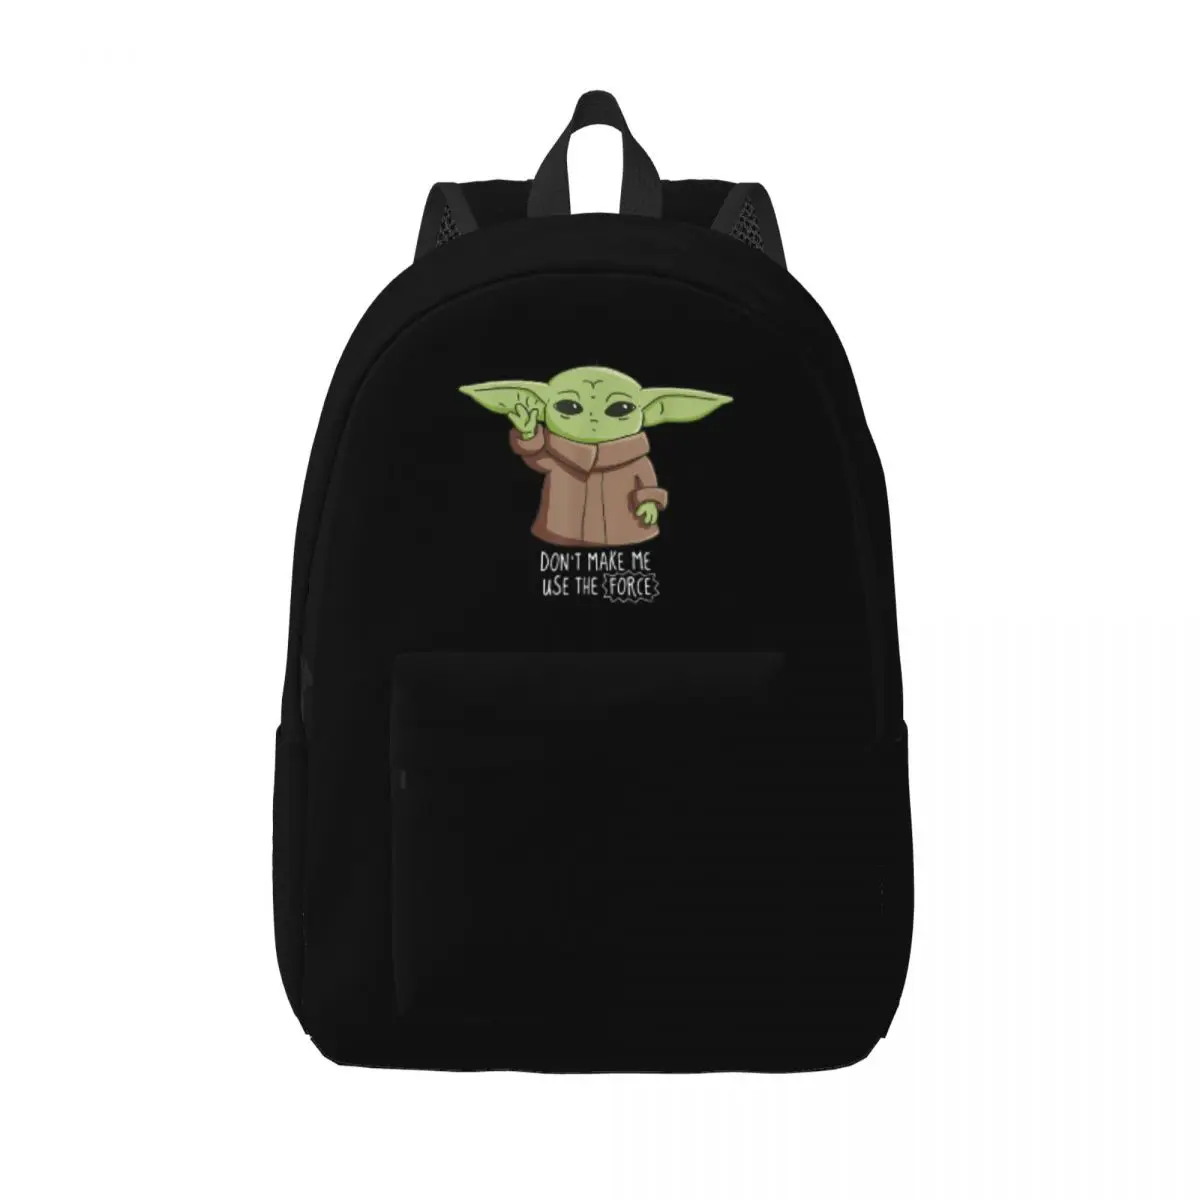 

Disney Star Wars Mandalorian Backpack Elementary High College School Student Don't Make Me Use The Force Bookbag Daypack with